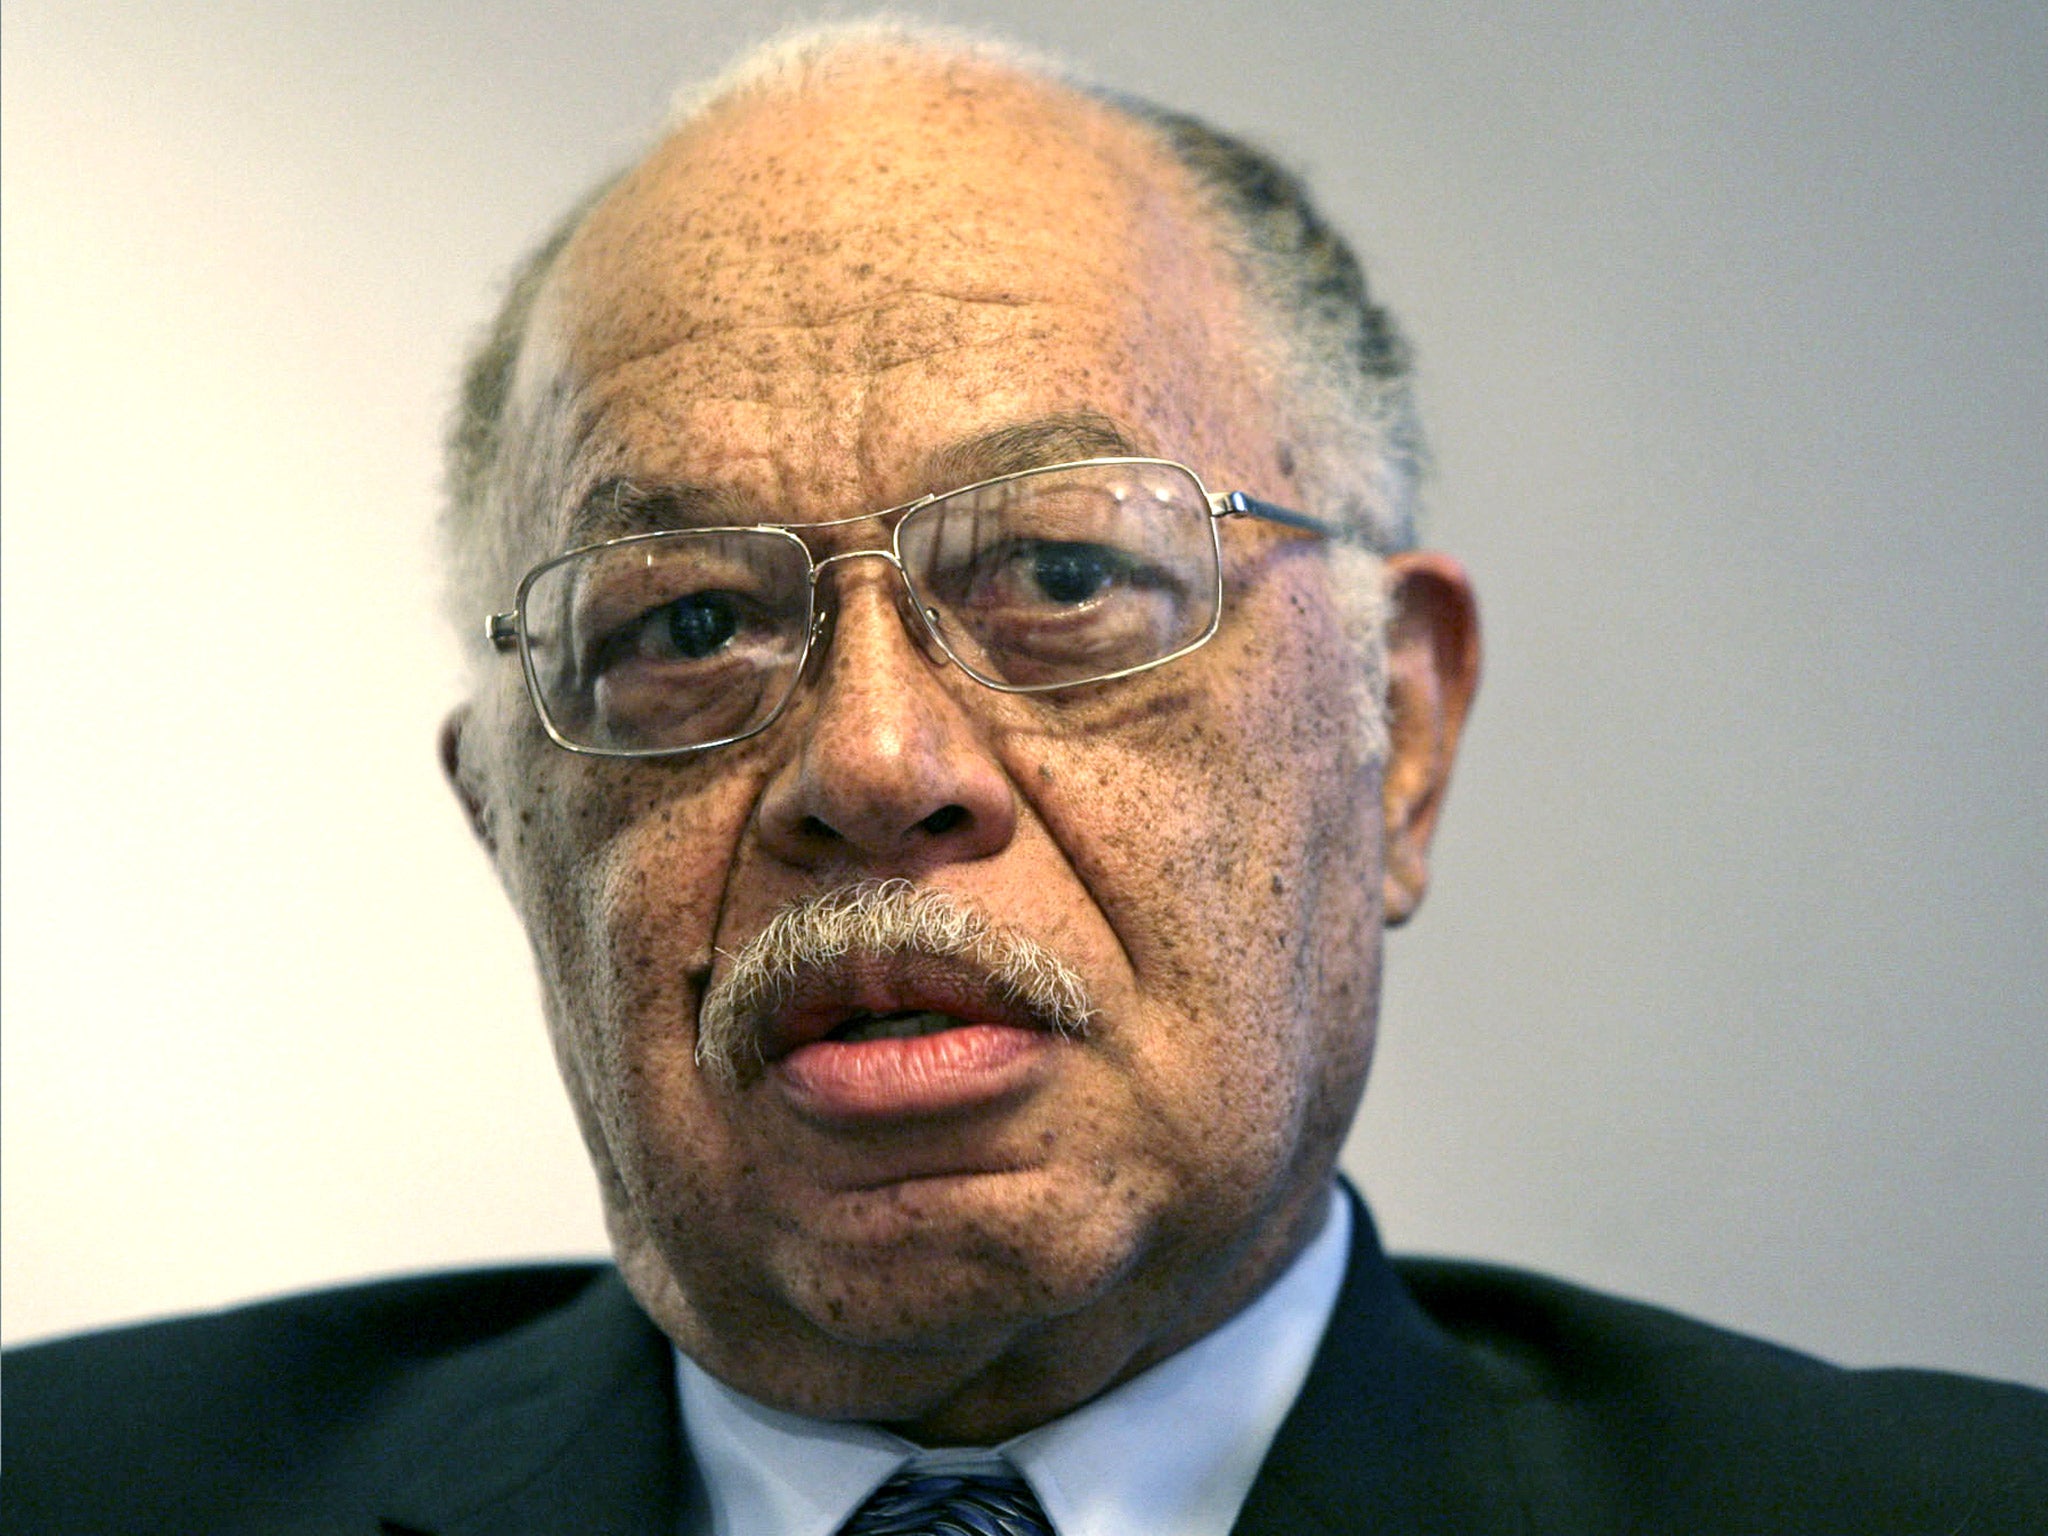 Dr Kermit Gosnell's clinic was a last resort for underprivileged women seeking late-term abortions